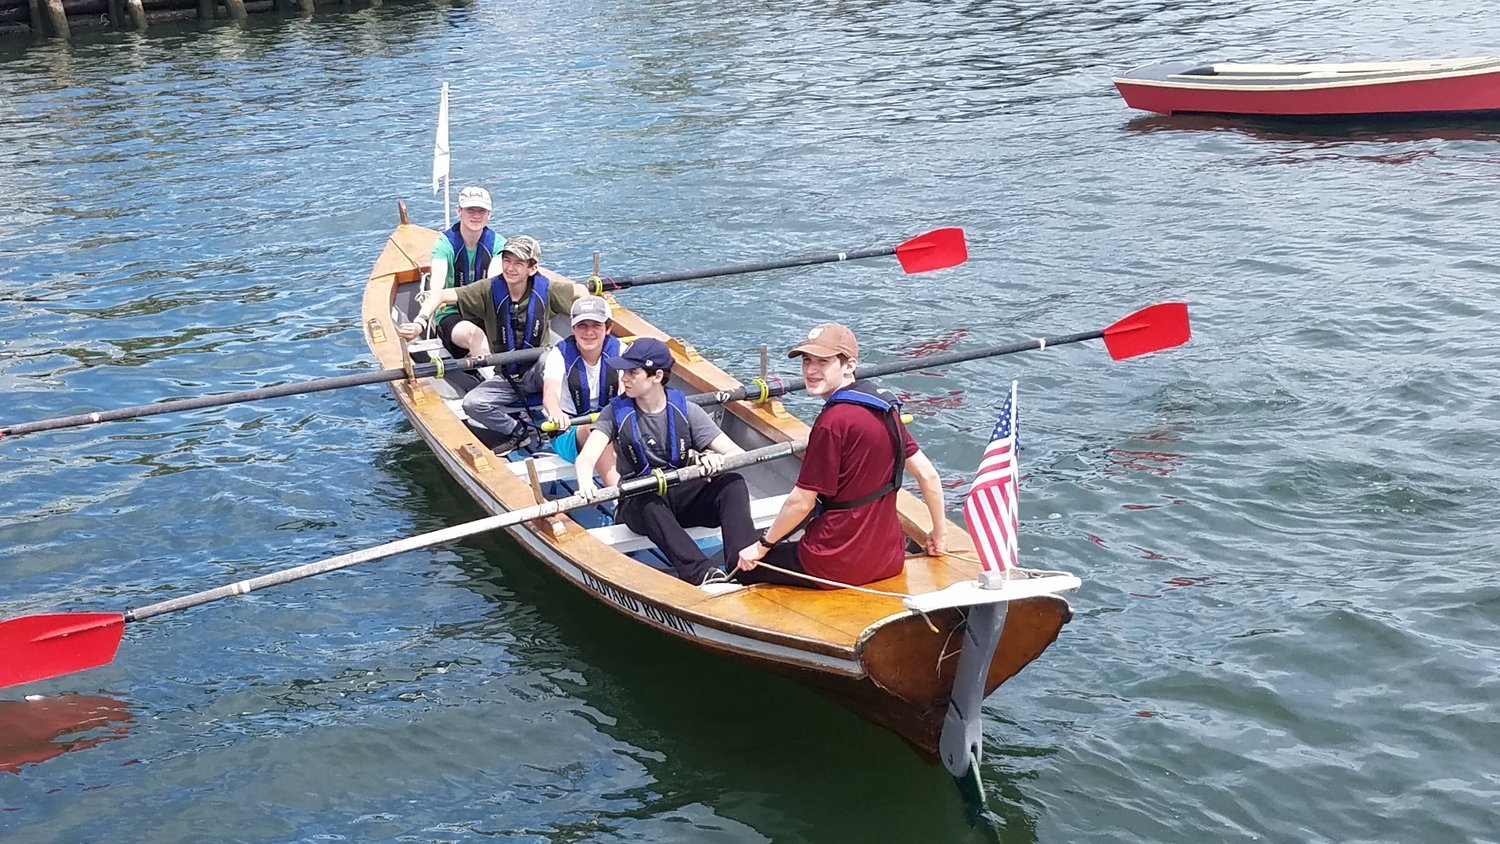 Westport rowers in Connecticut included (from left) Blake Stewart, Montgomery "Monty" Jonsson, Andre Jusseaume, Samuel Hall and coxswain Ethan Stewart before the start of a heat at Saturday's competition.